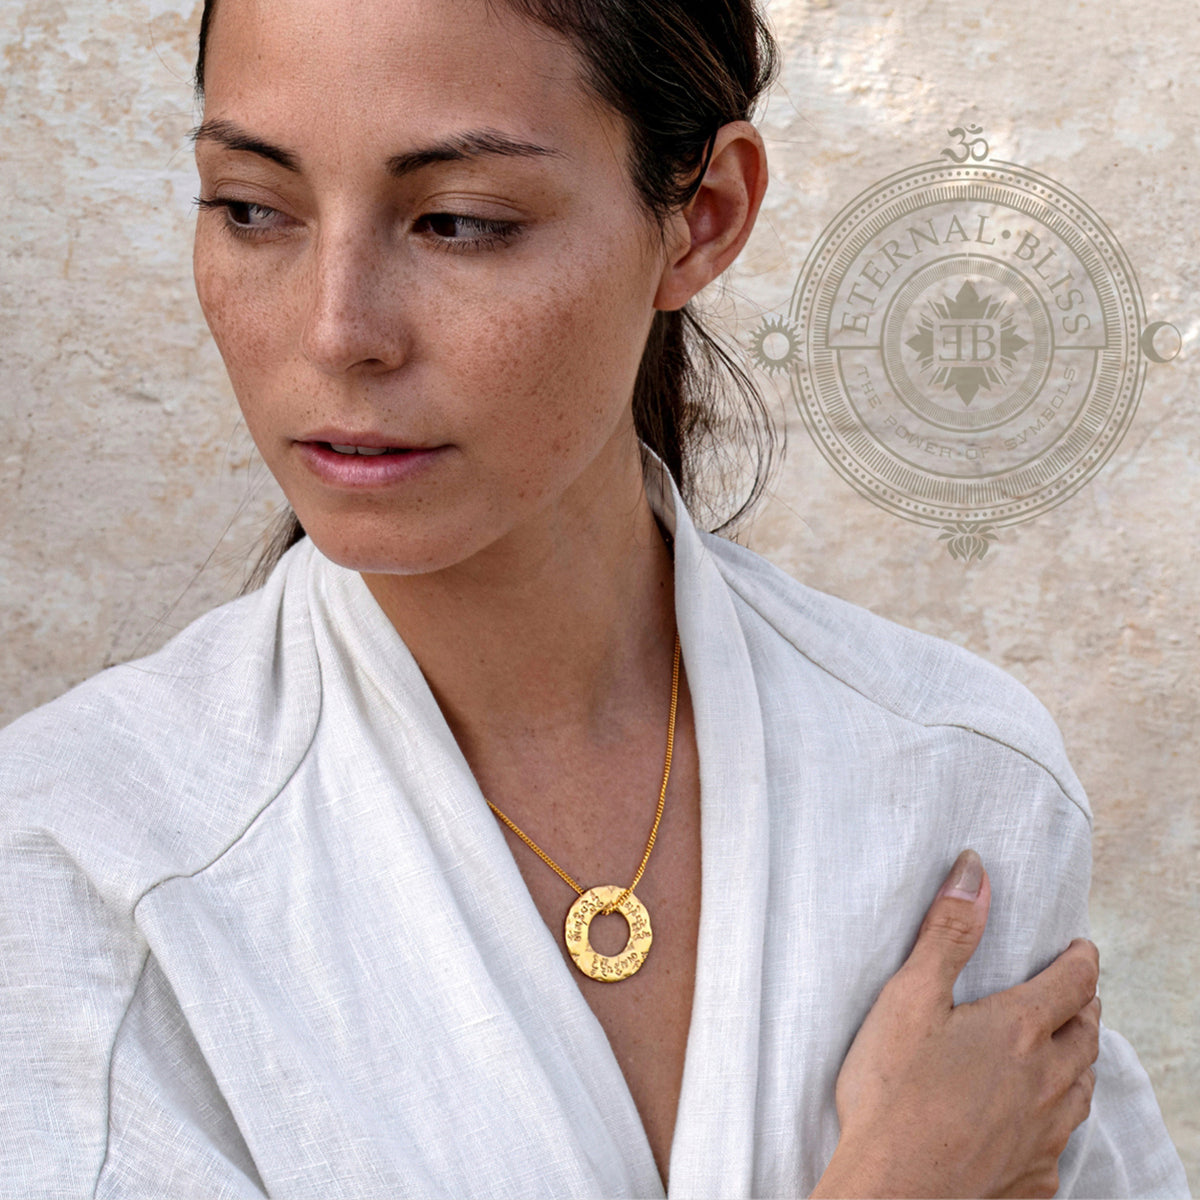 High-quality spiritual jewelry from ETERNAL BLISS: The Om Mani Padme Hum Mantra jewelry collection